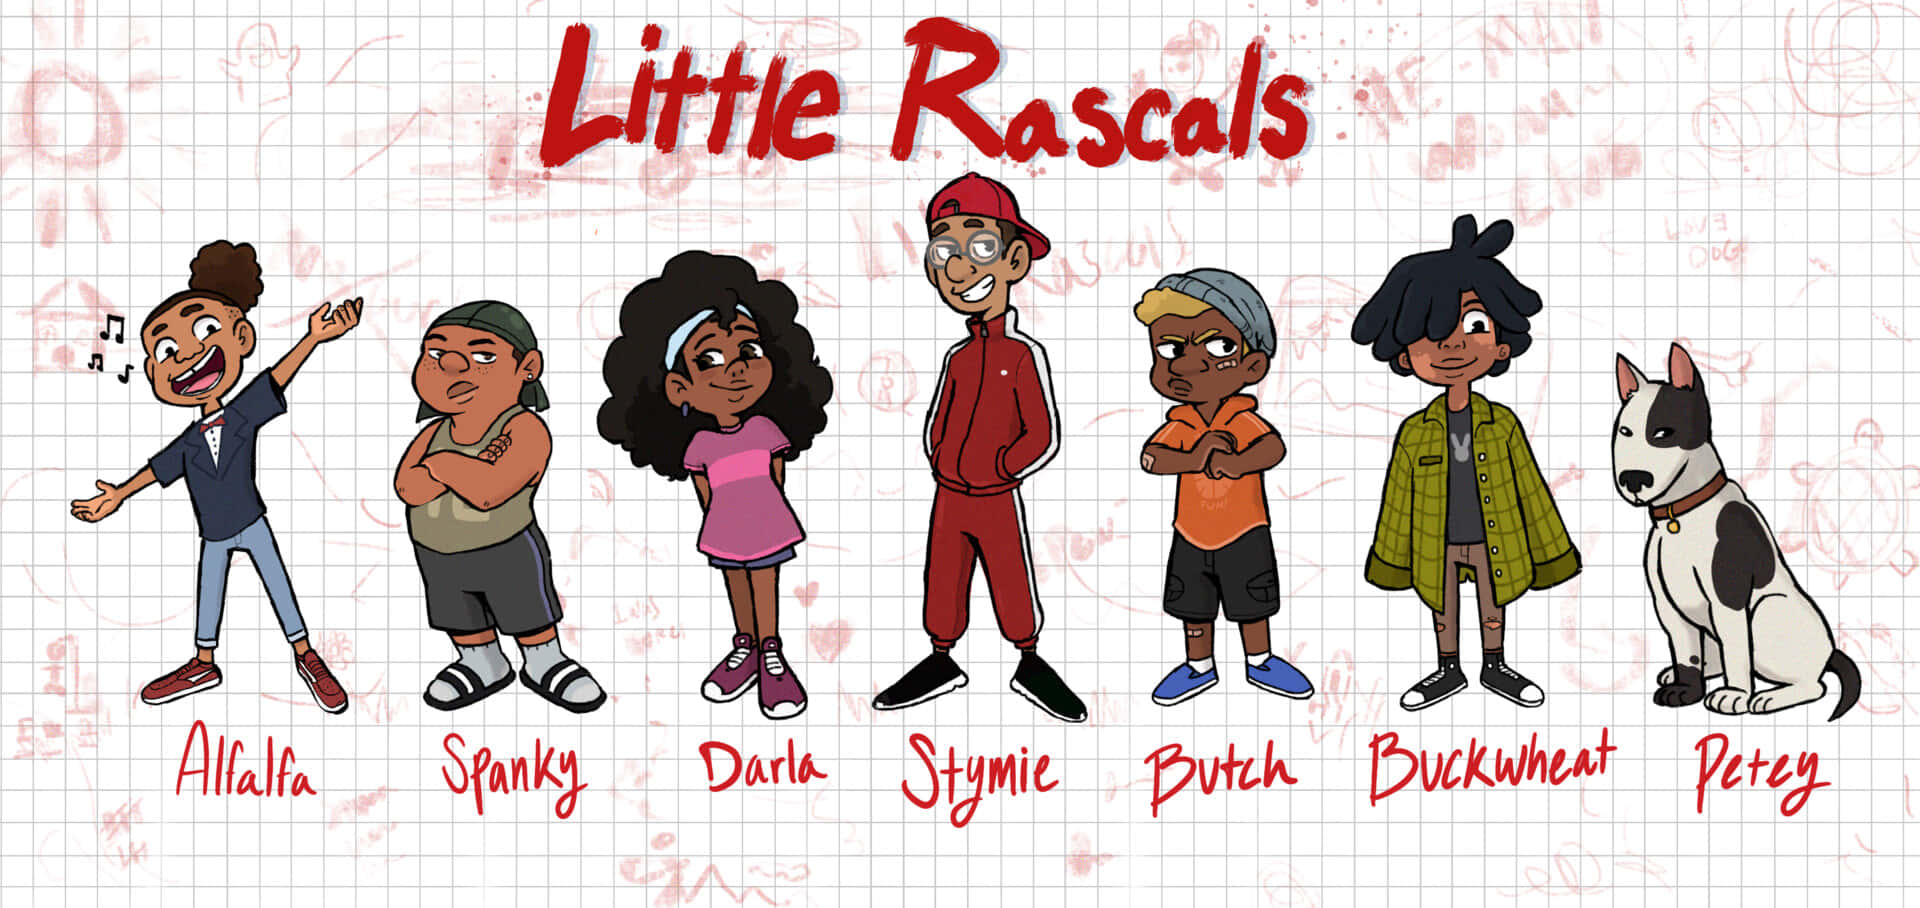 Little Rascals - A Cartoon Of The Characters